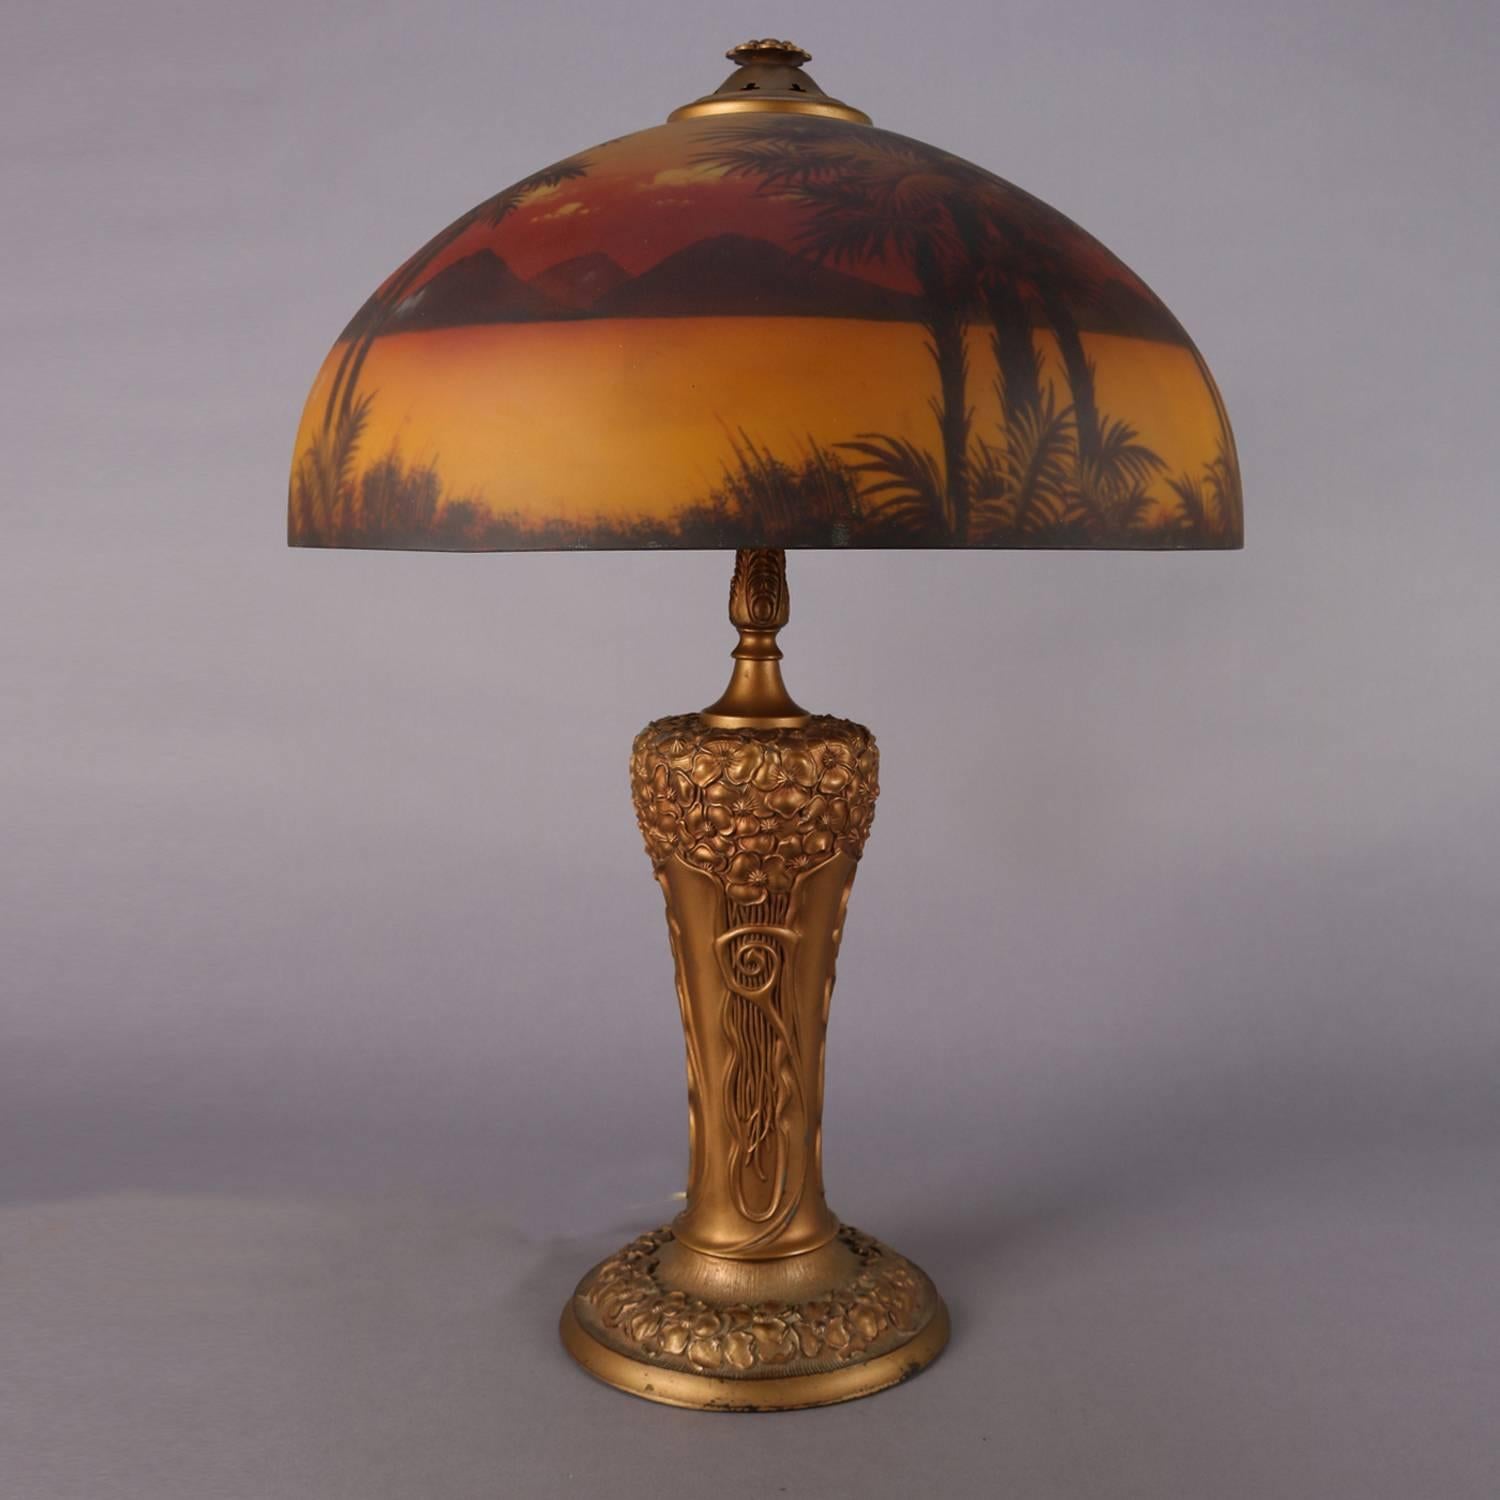 Hand-Painted Art & Crafts Pittsburgh Reverse Painted Phoenix Table Lamp, circa 1910